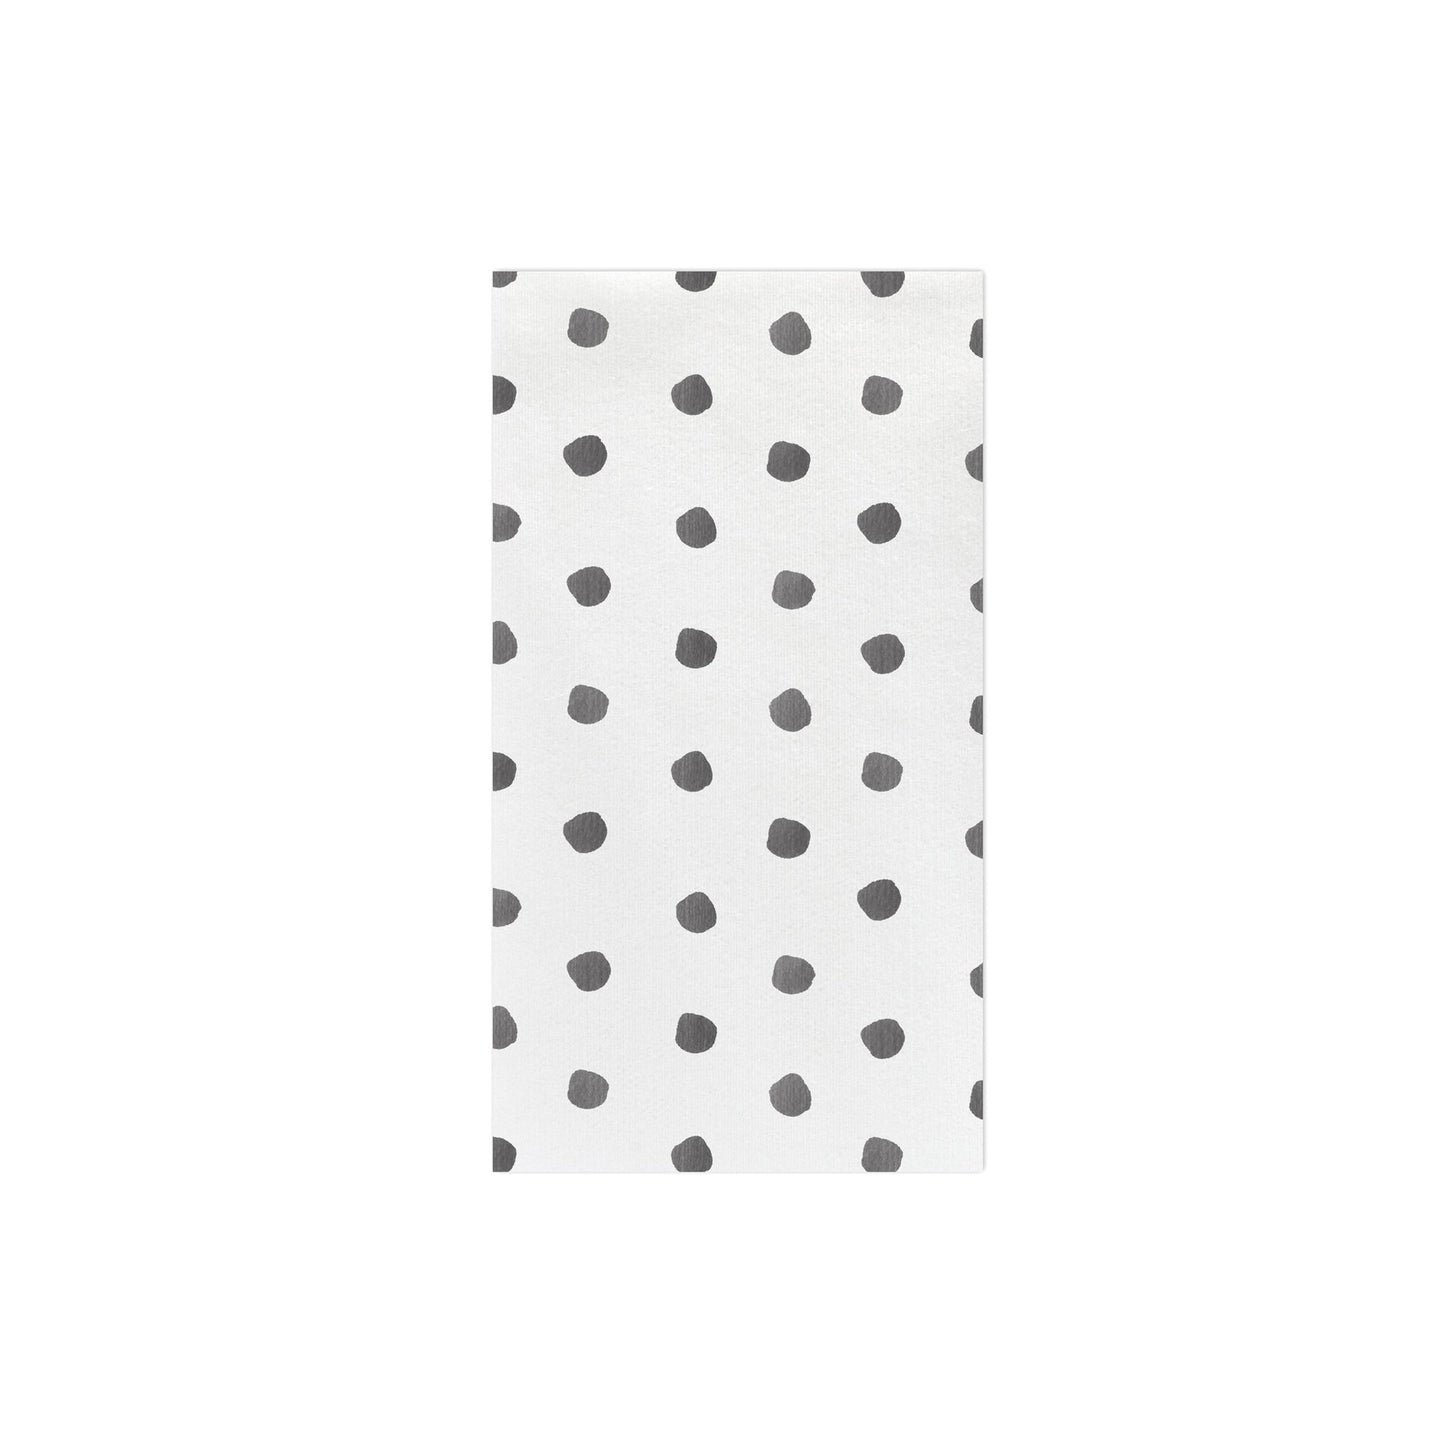 Papersoft Napkins Dot Grey Guest Towels (Pack of 20) Home Decor Vietri   